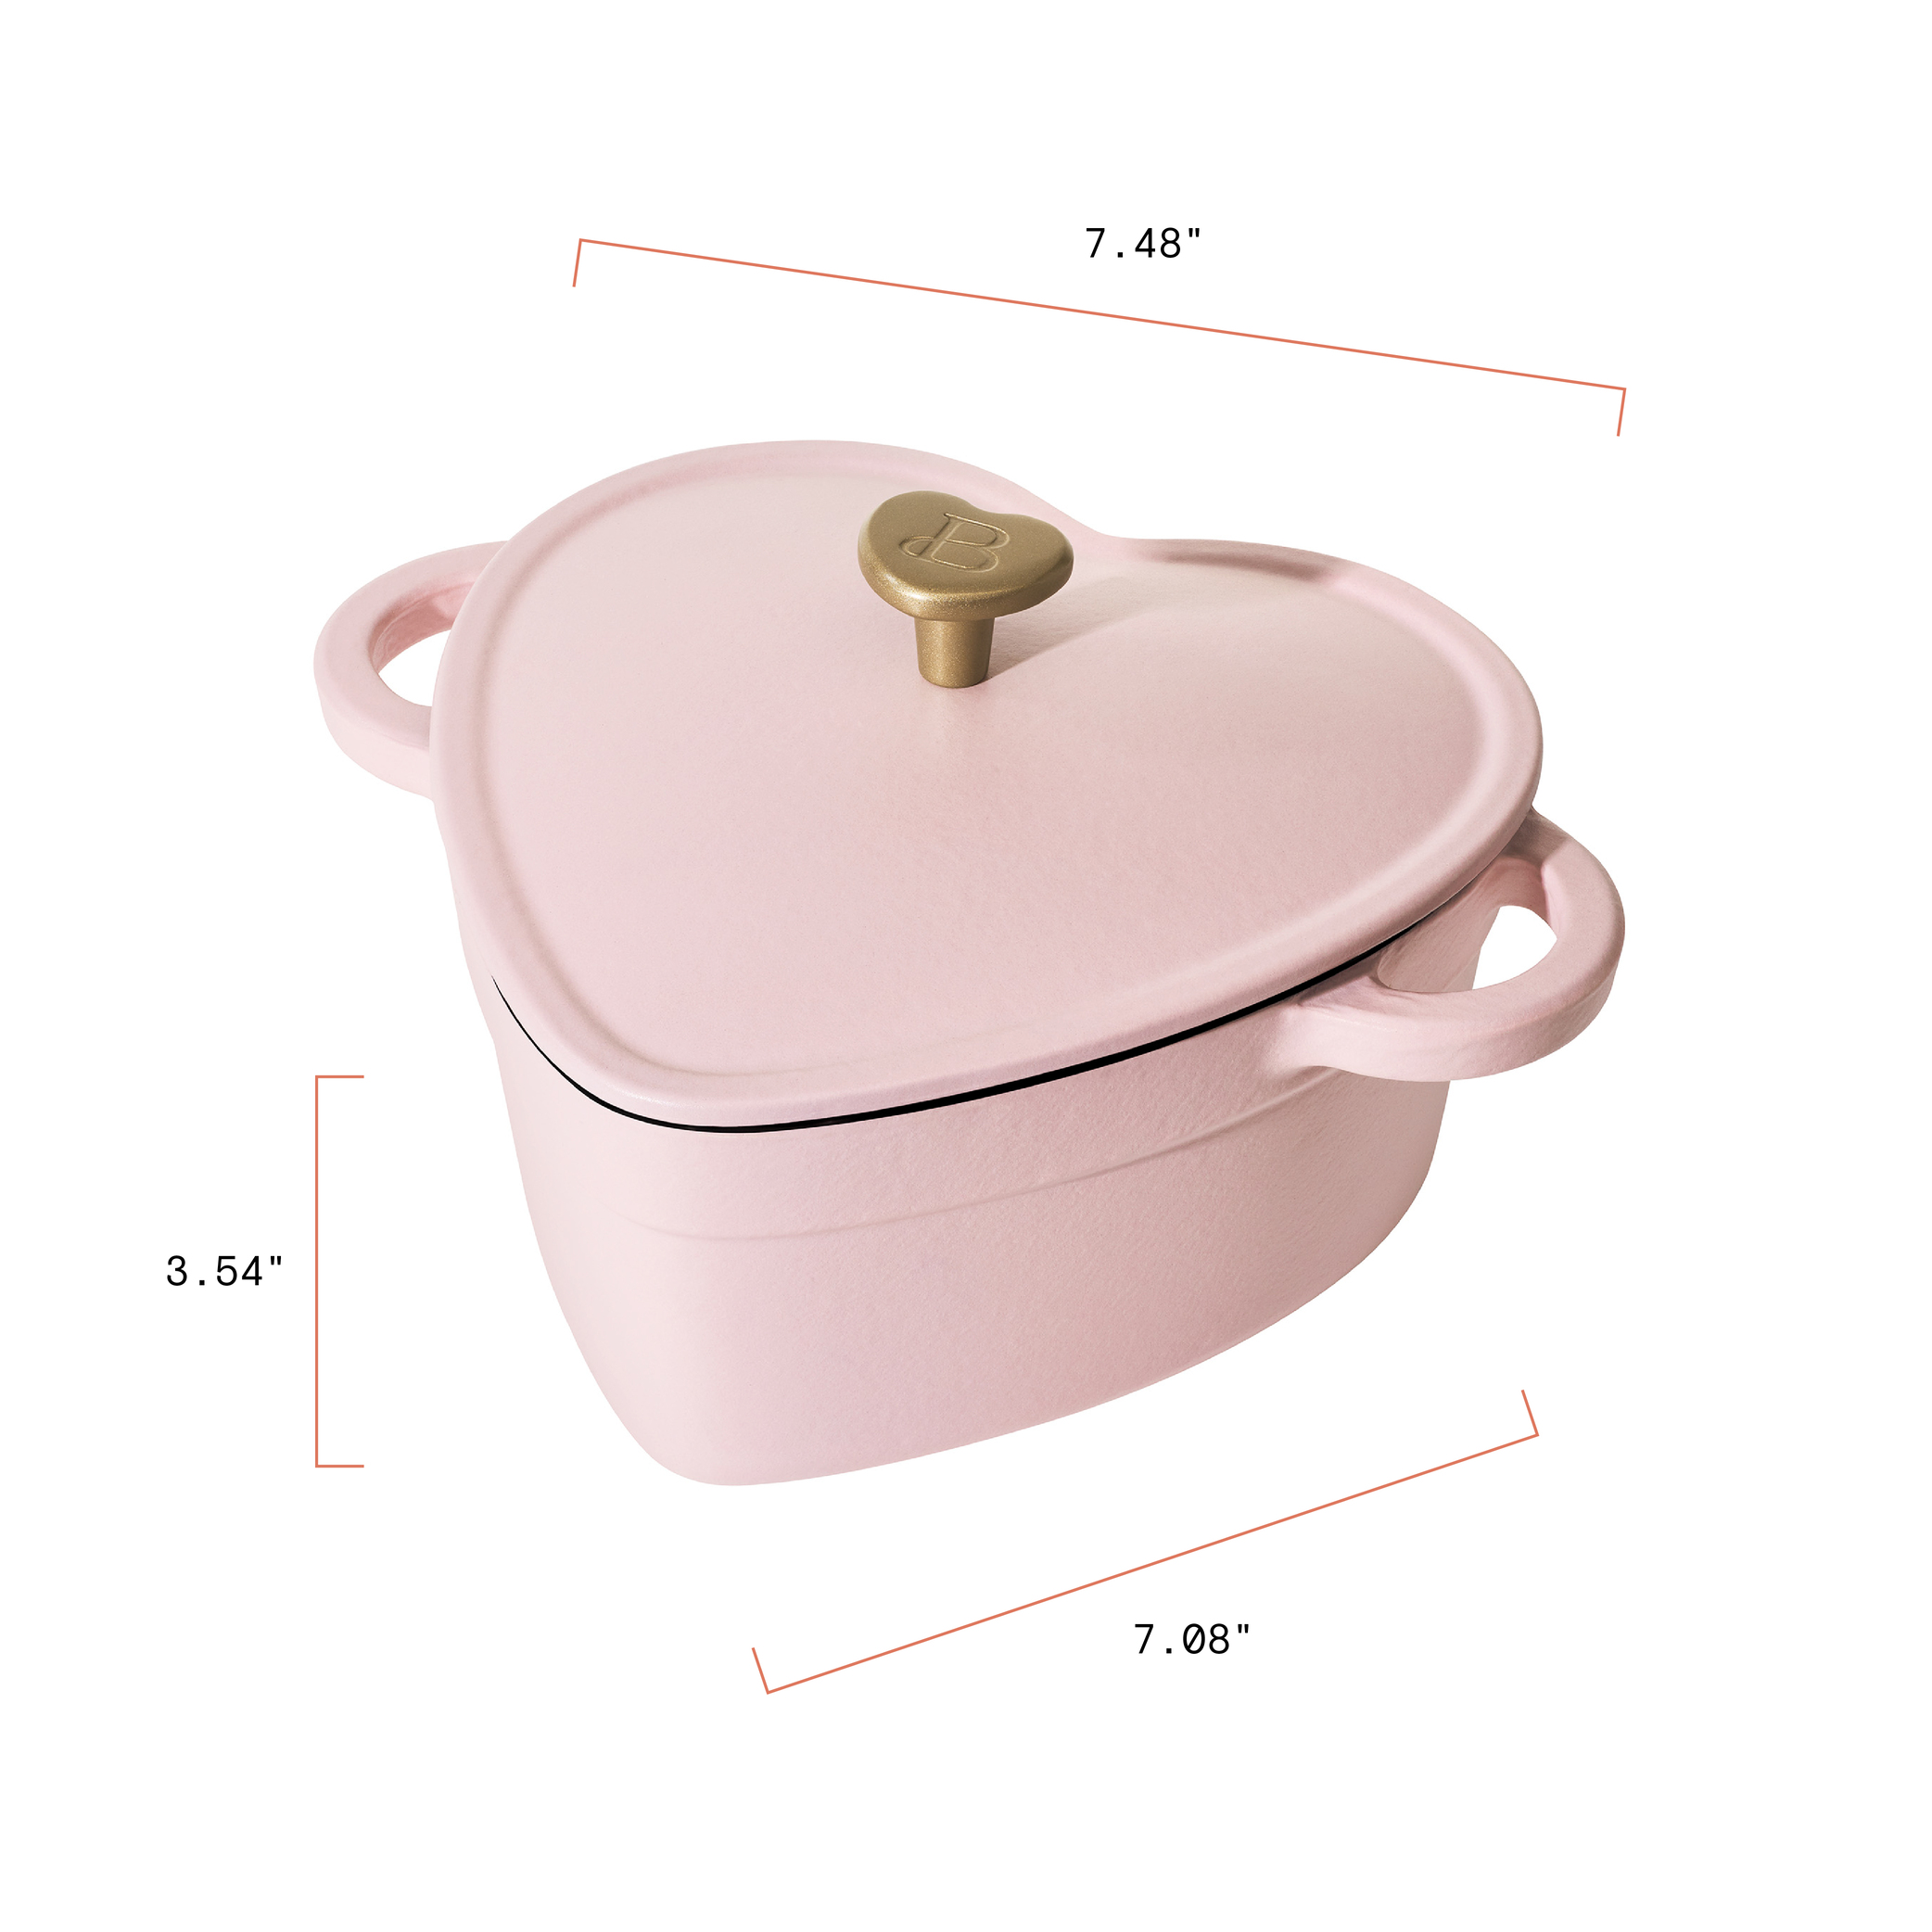 Beautiful 2QT Cast Iron Heart Dutch Oven, Pink Champagne by Drew Barrymore - image 3 of 10